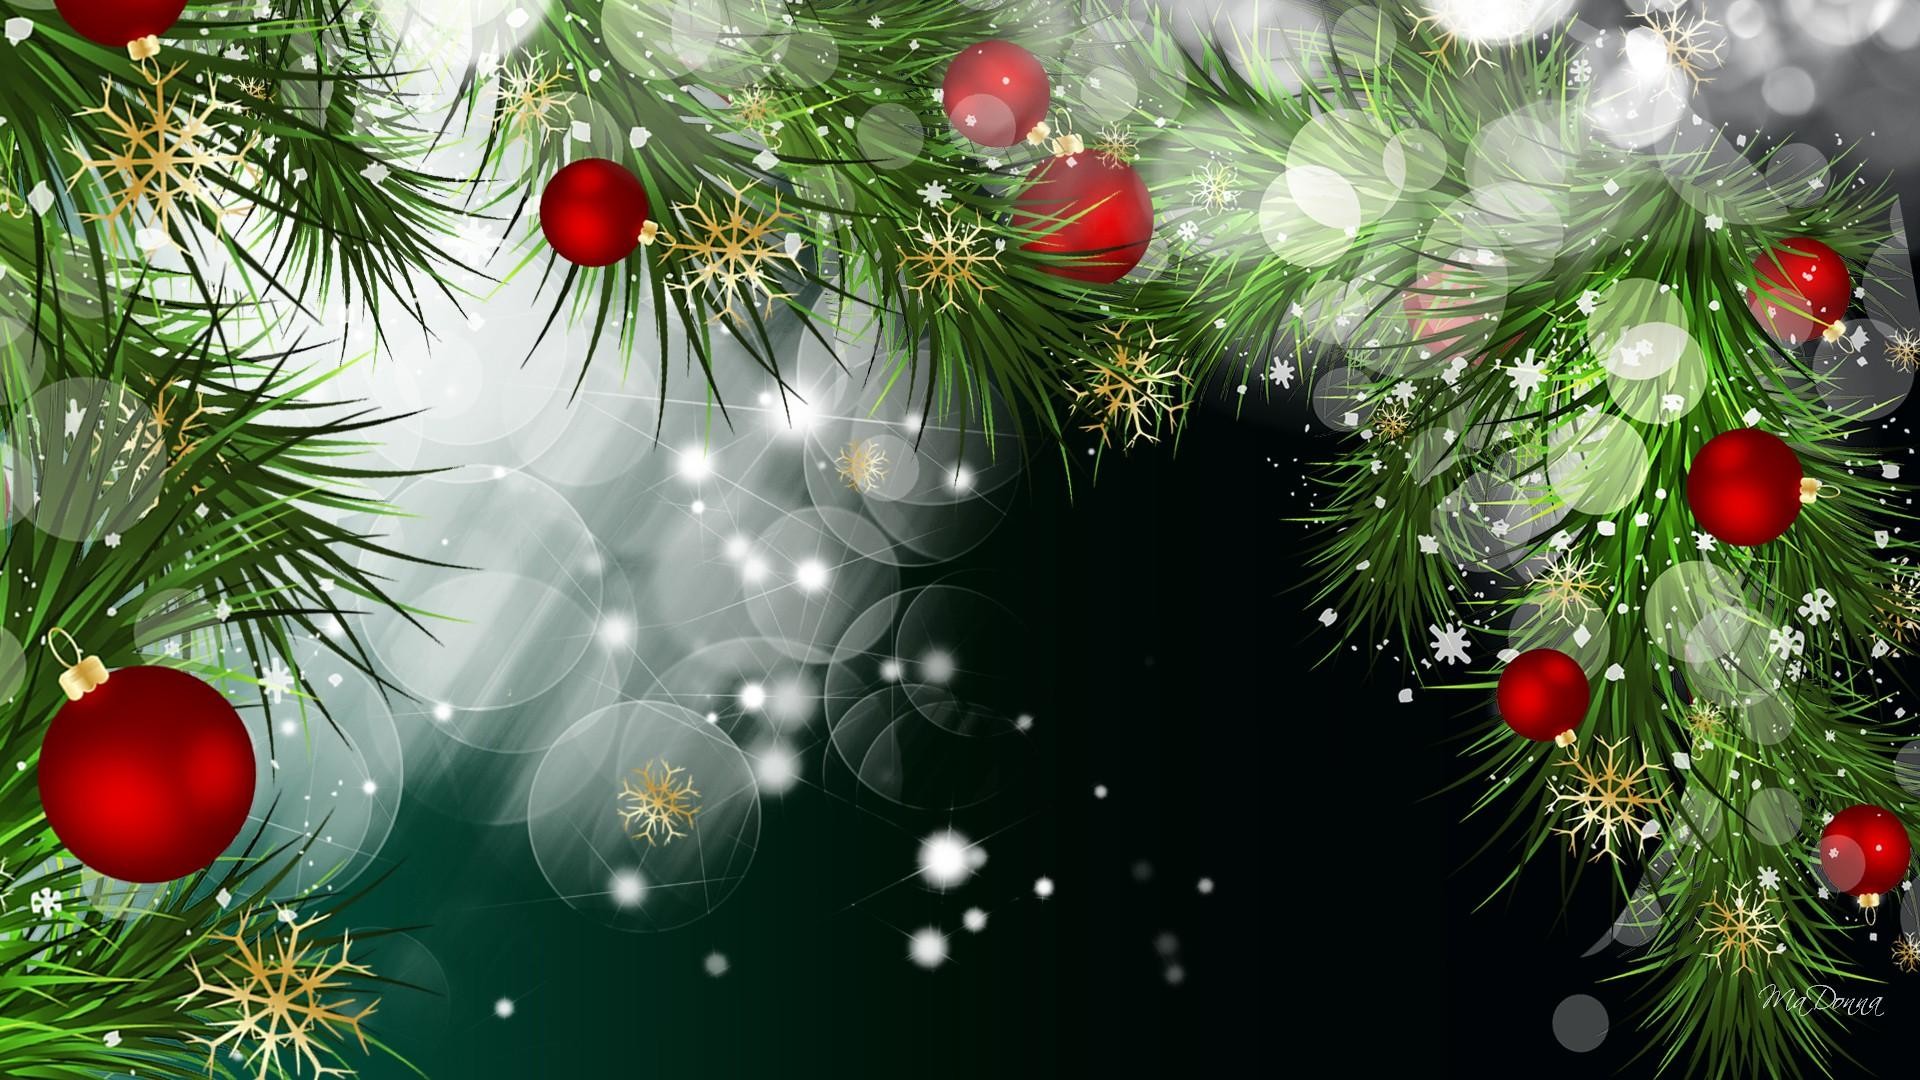 1920x1080 Bright Christmas Backgrounds wallpaper